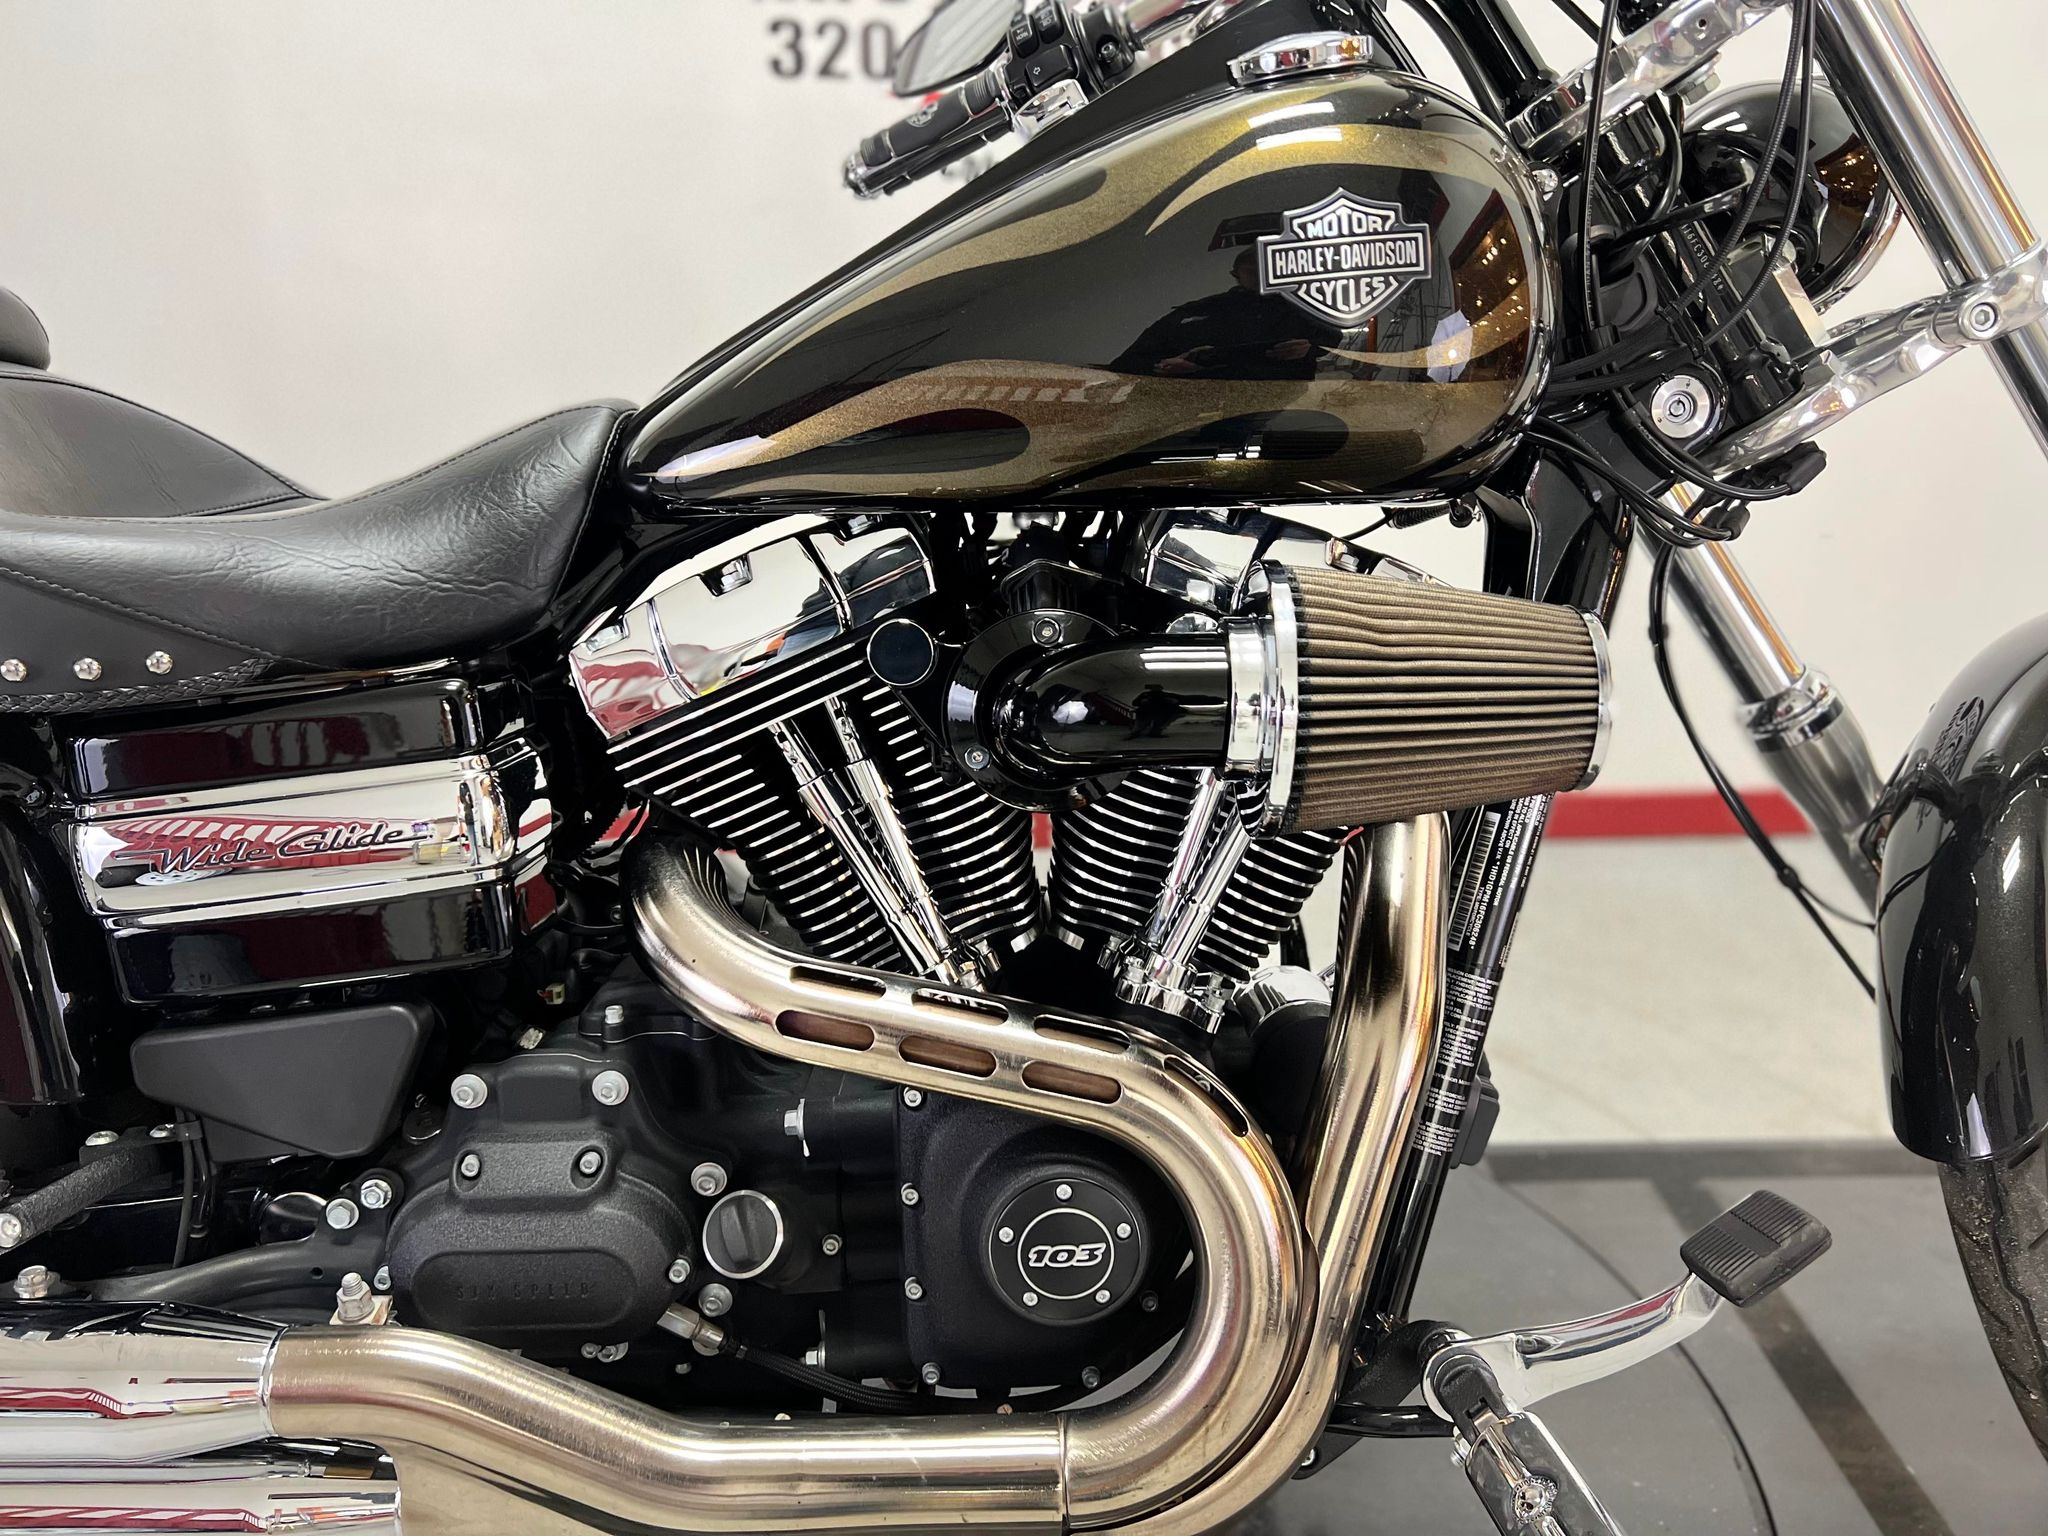 2015 Wide Glide FXDWG 103 Edition